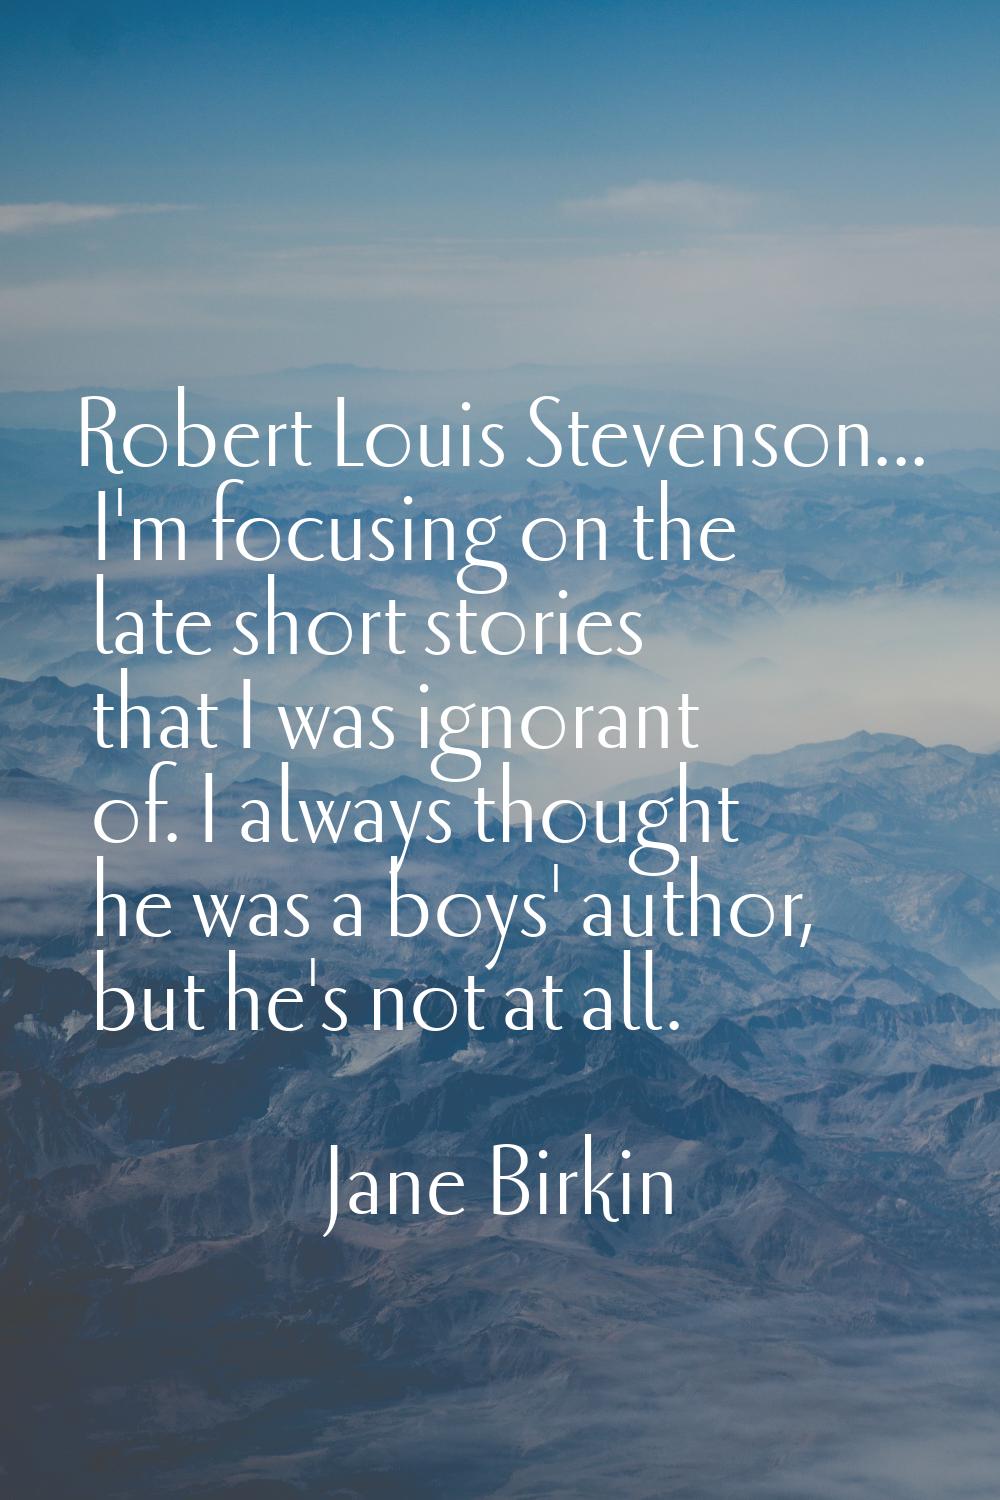 Robert Louis Stevenson... I'm focusing on the late short stories that I was ignorant of. I always t